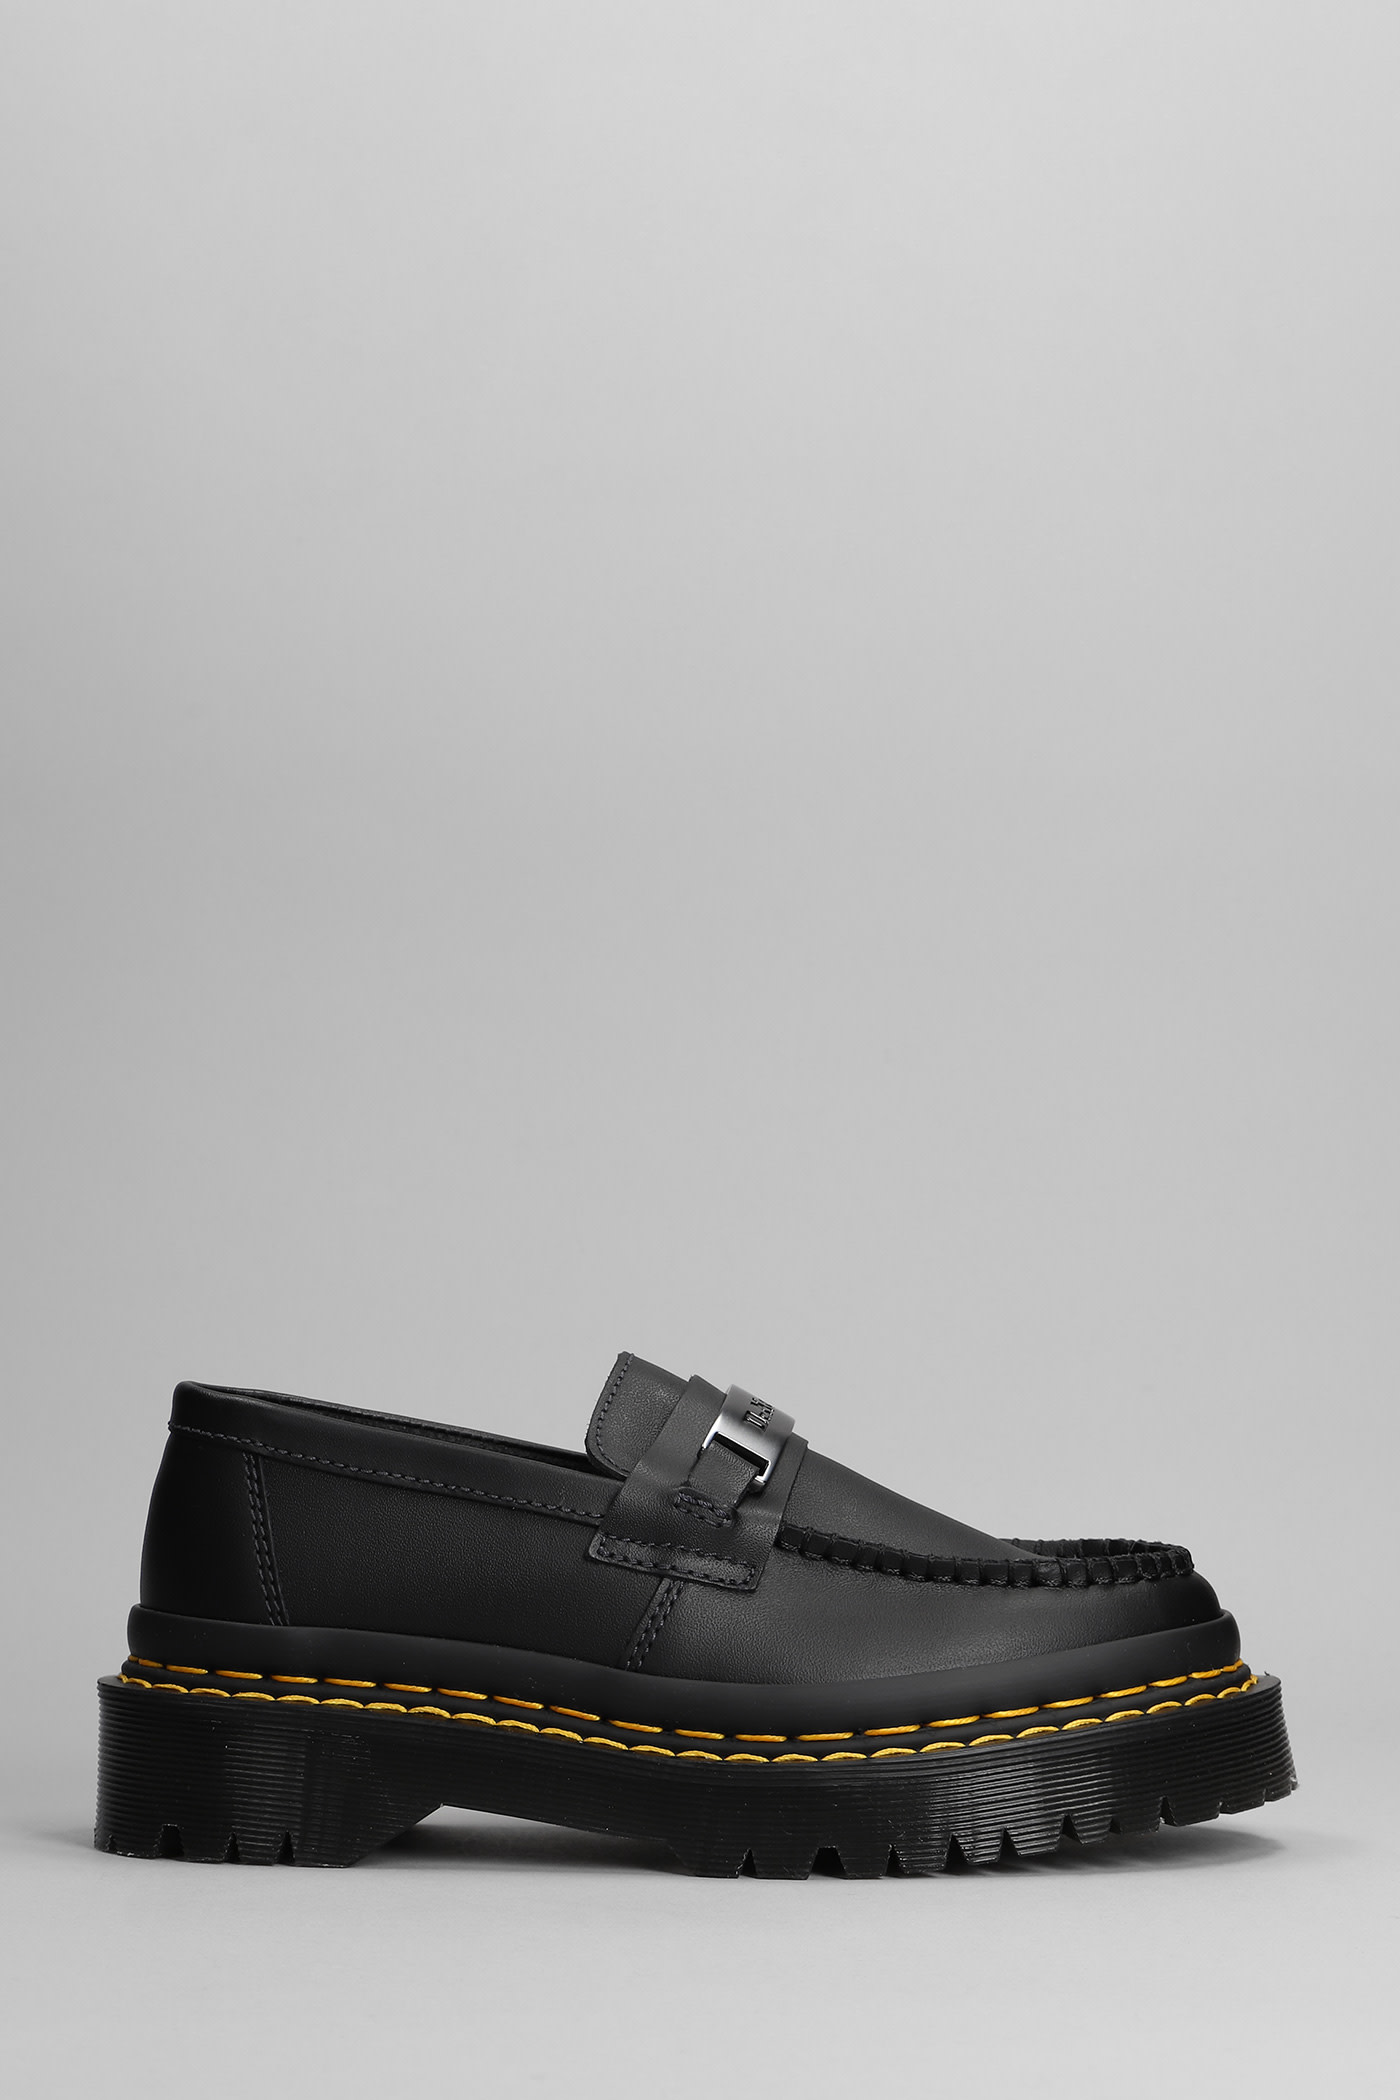 Dr. Martens Penton Bex Loafers In Black Leather